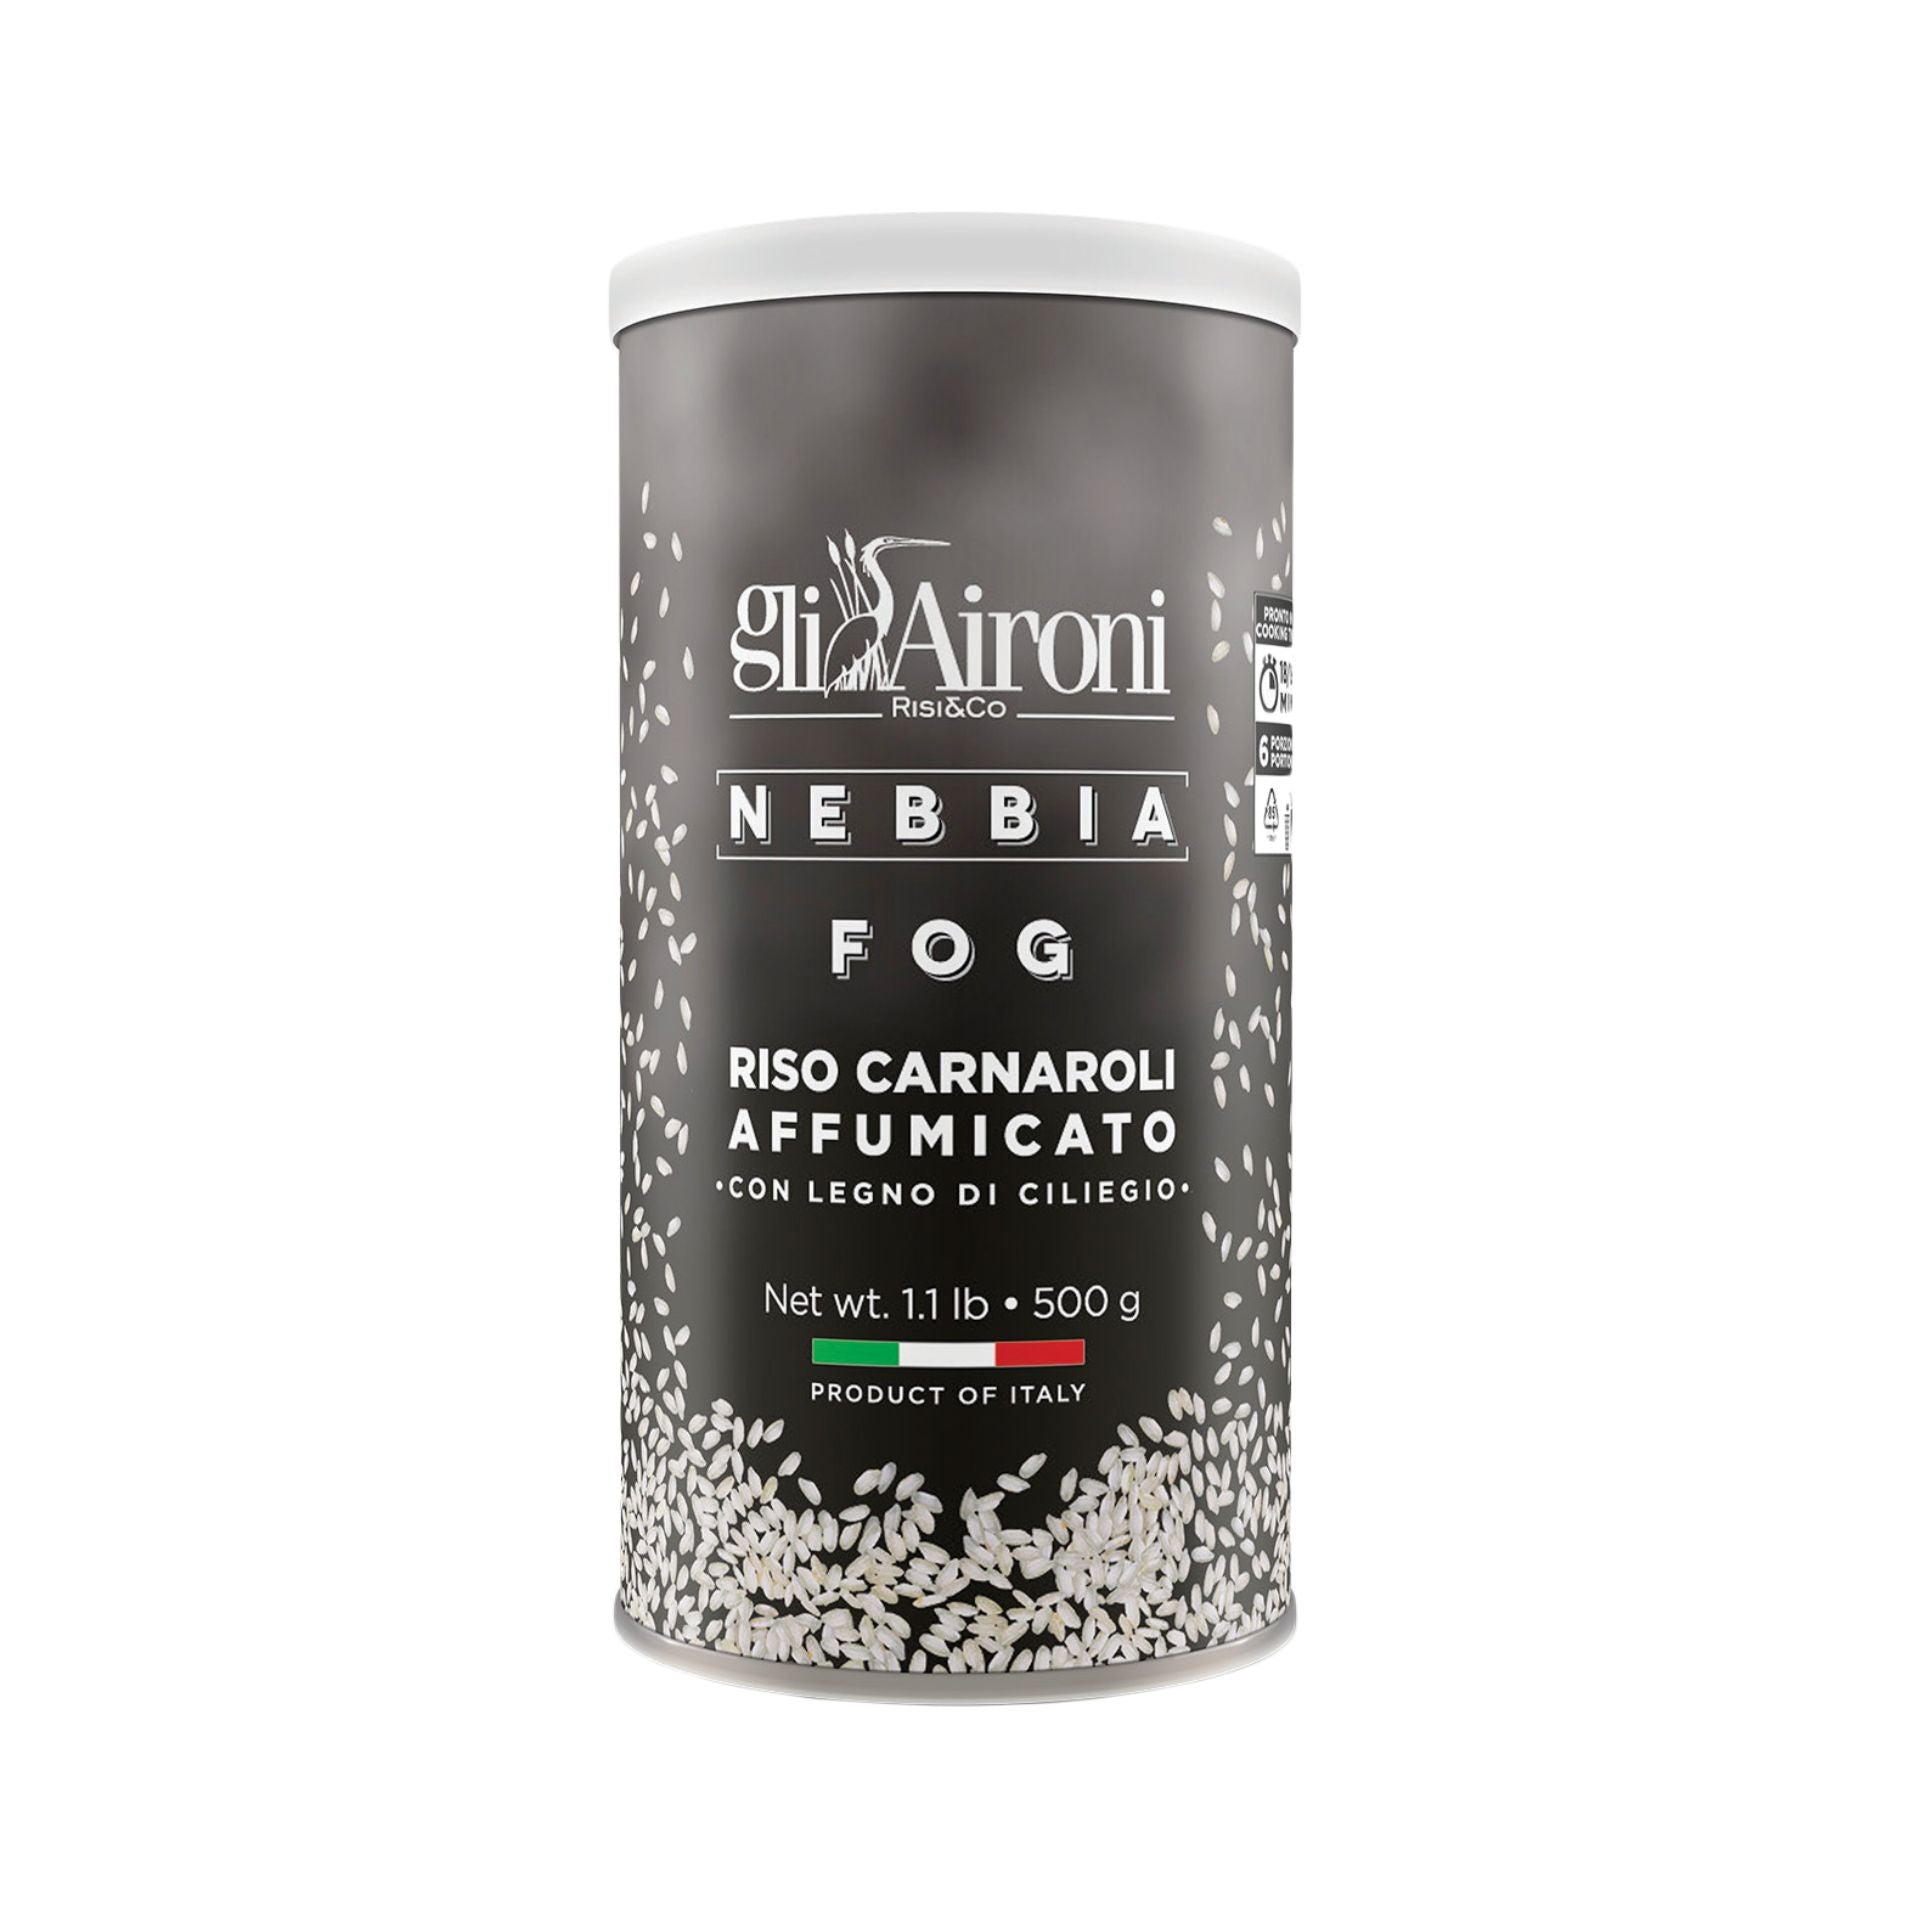 Gli Aironi Fog Smoked Carnaroli Rice 500g (Tube)  | Imported and distributed in the UK by Just Gourmet Foods